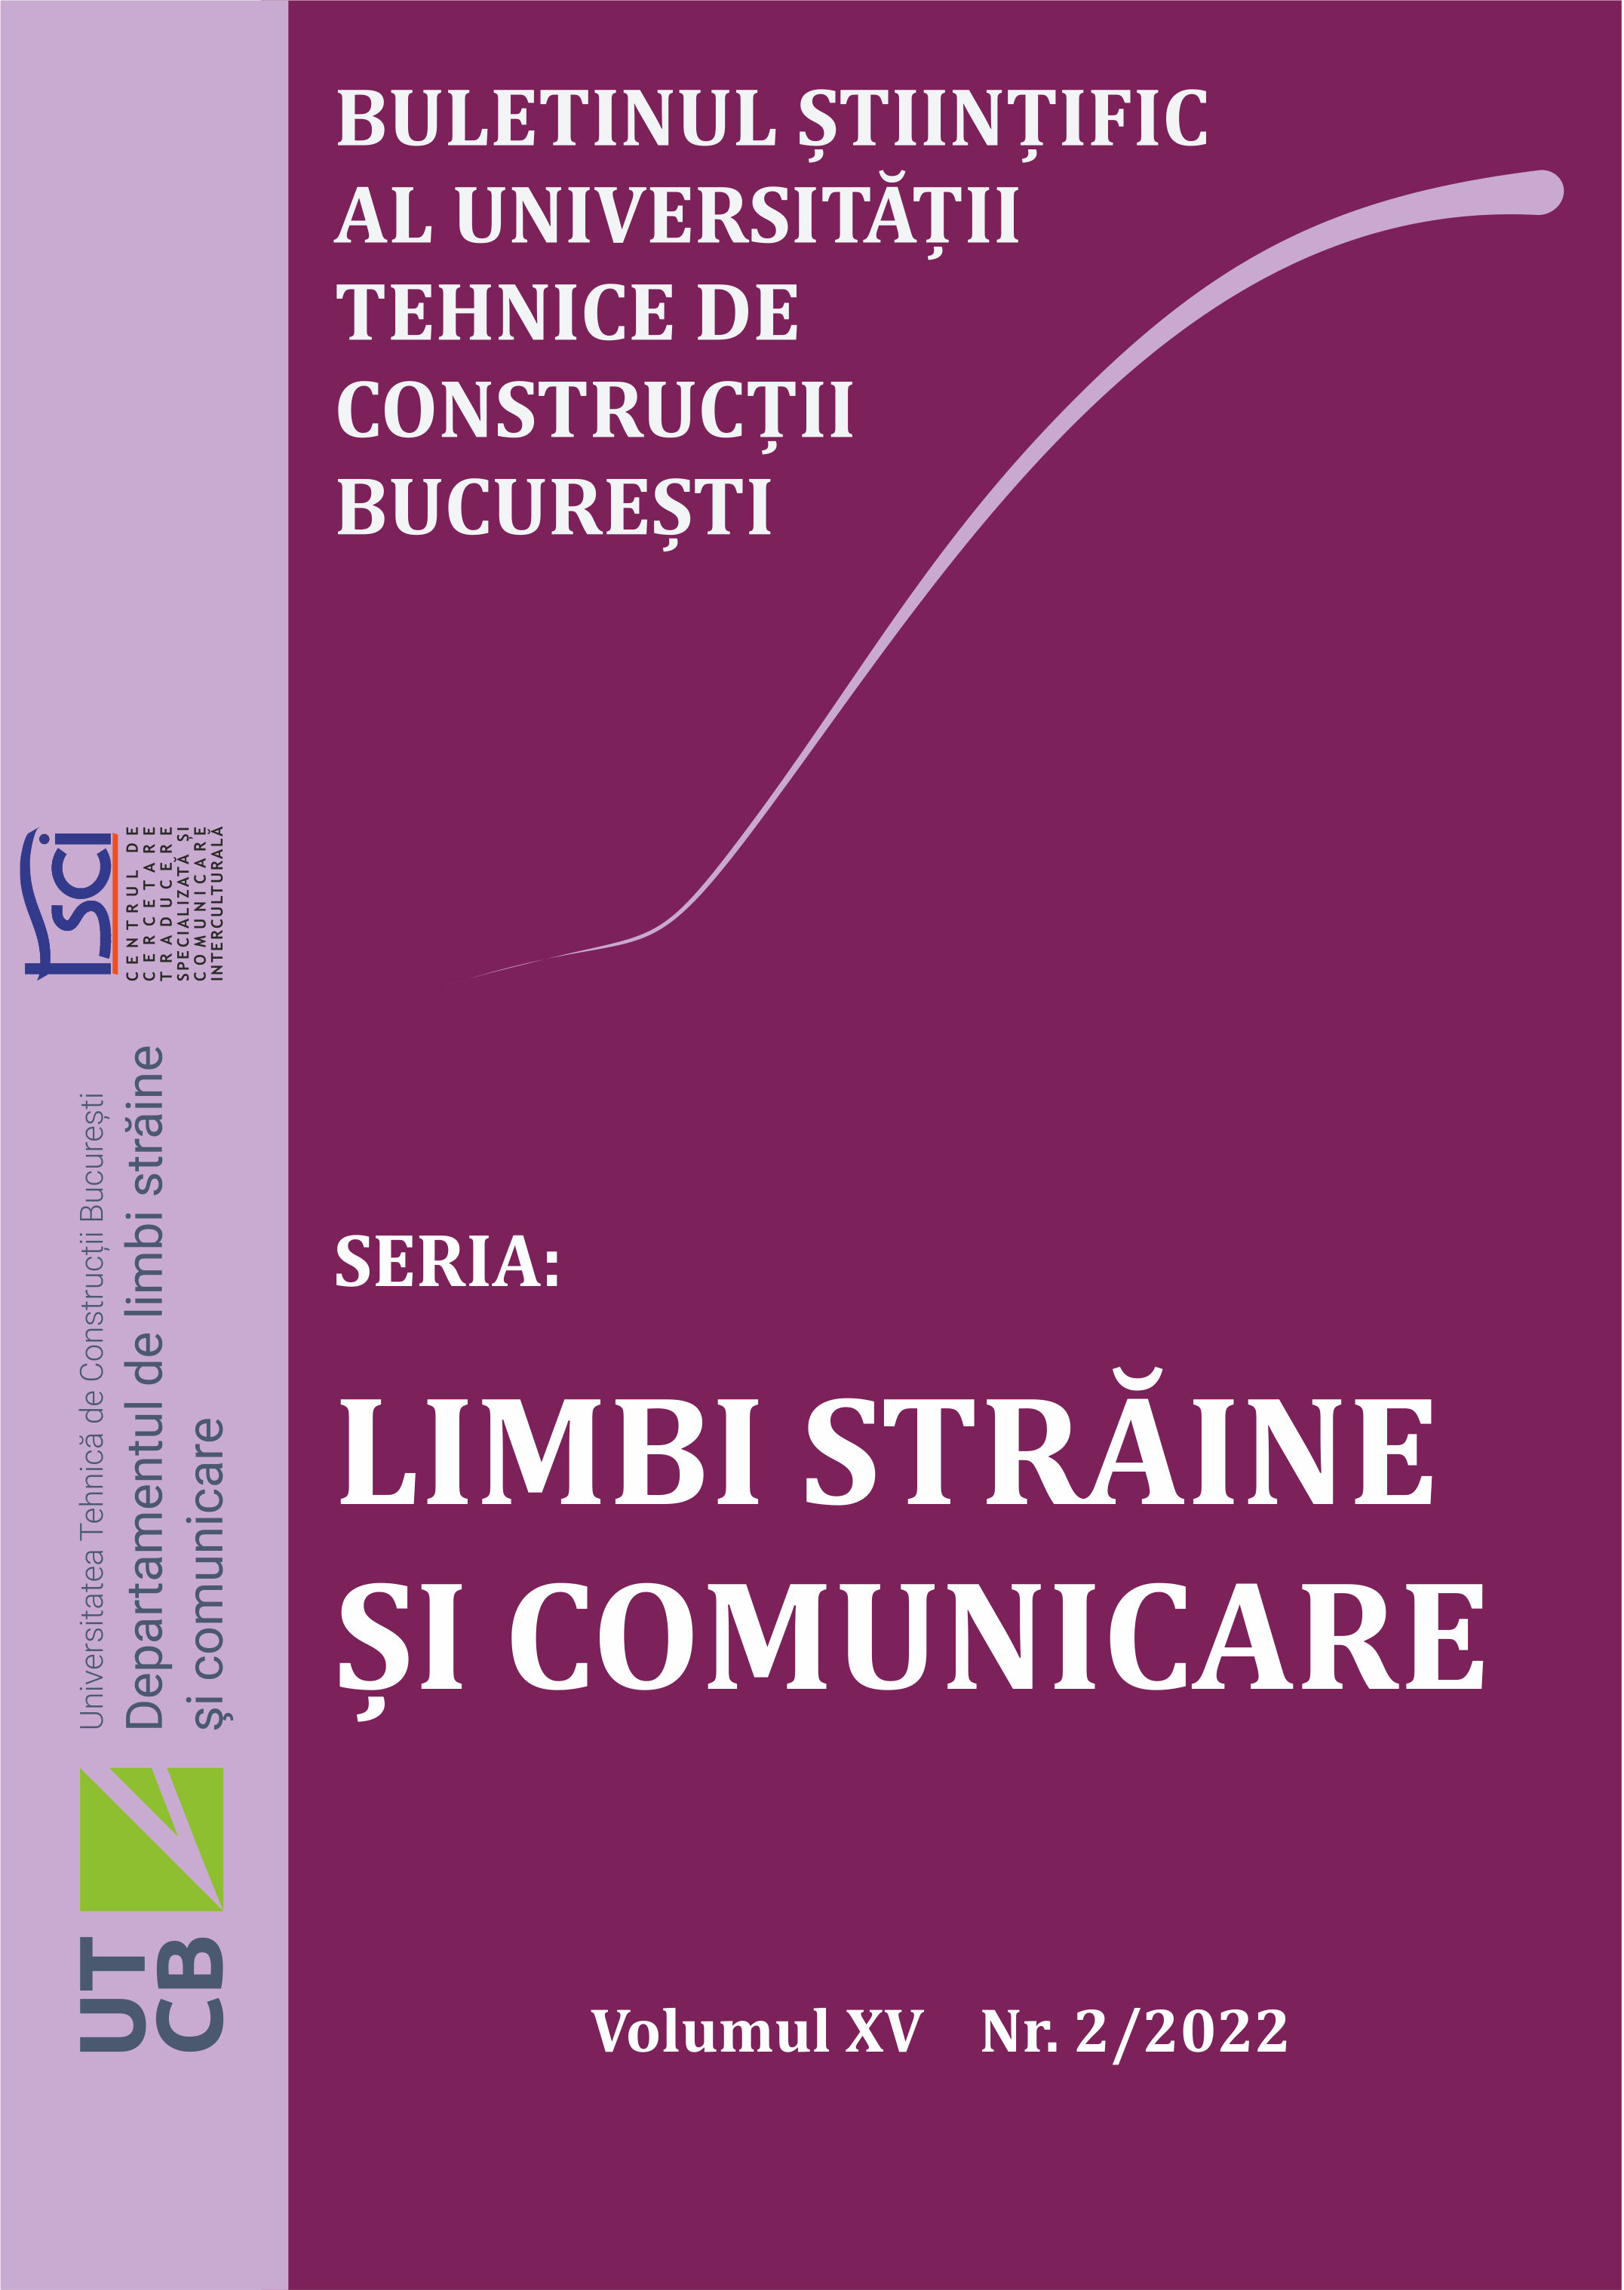 Avornicesei, O. (2022). A Practical Course for Simultaneous Interpretation. Sample Speeches and Practical Activities for the Use of Second-Year M.A. Students in Specialised Translation and Interpretation (MATIS). București: Editura Conspress.